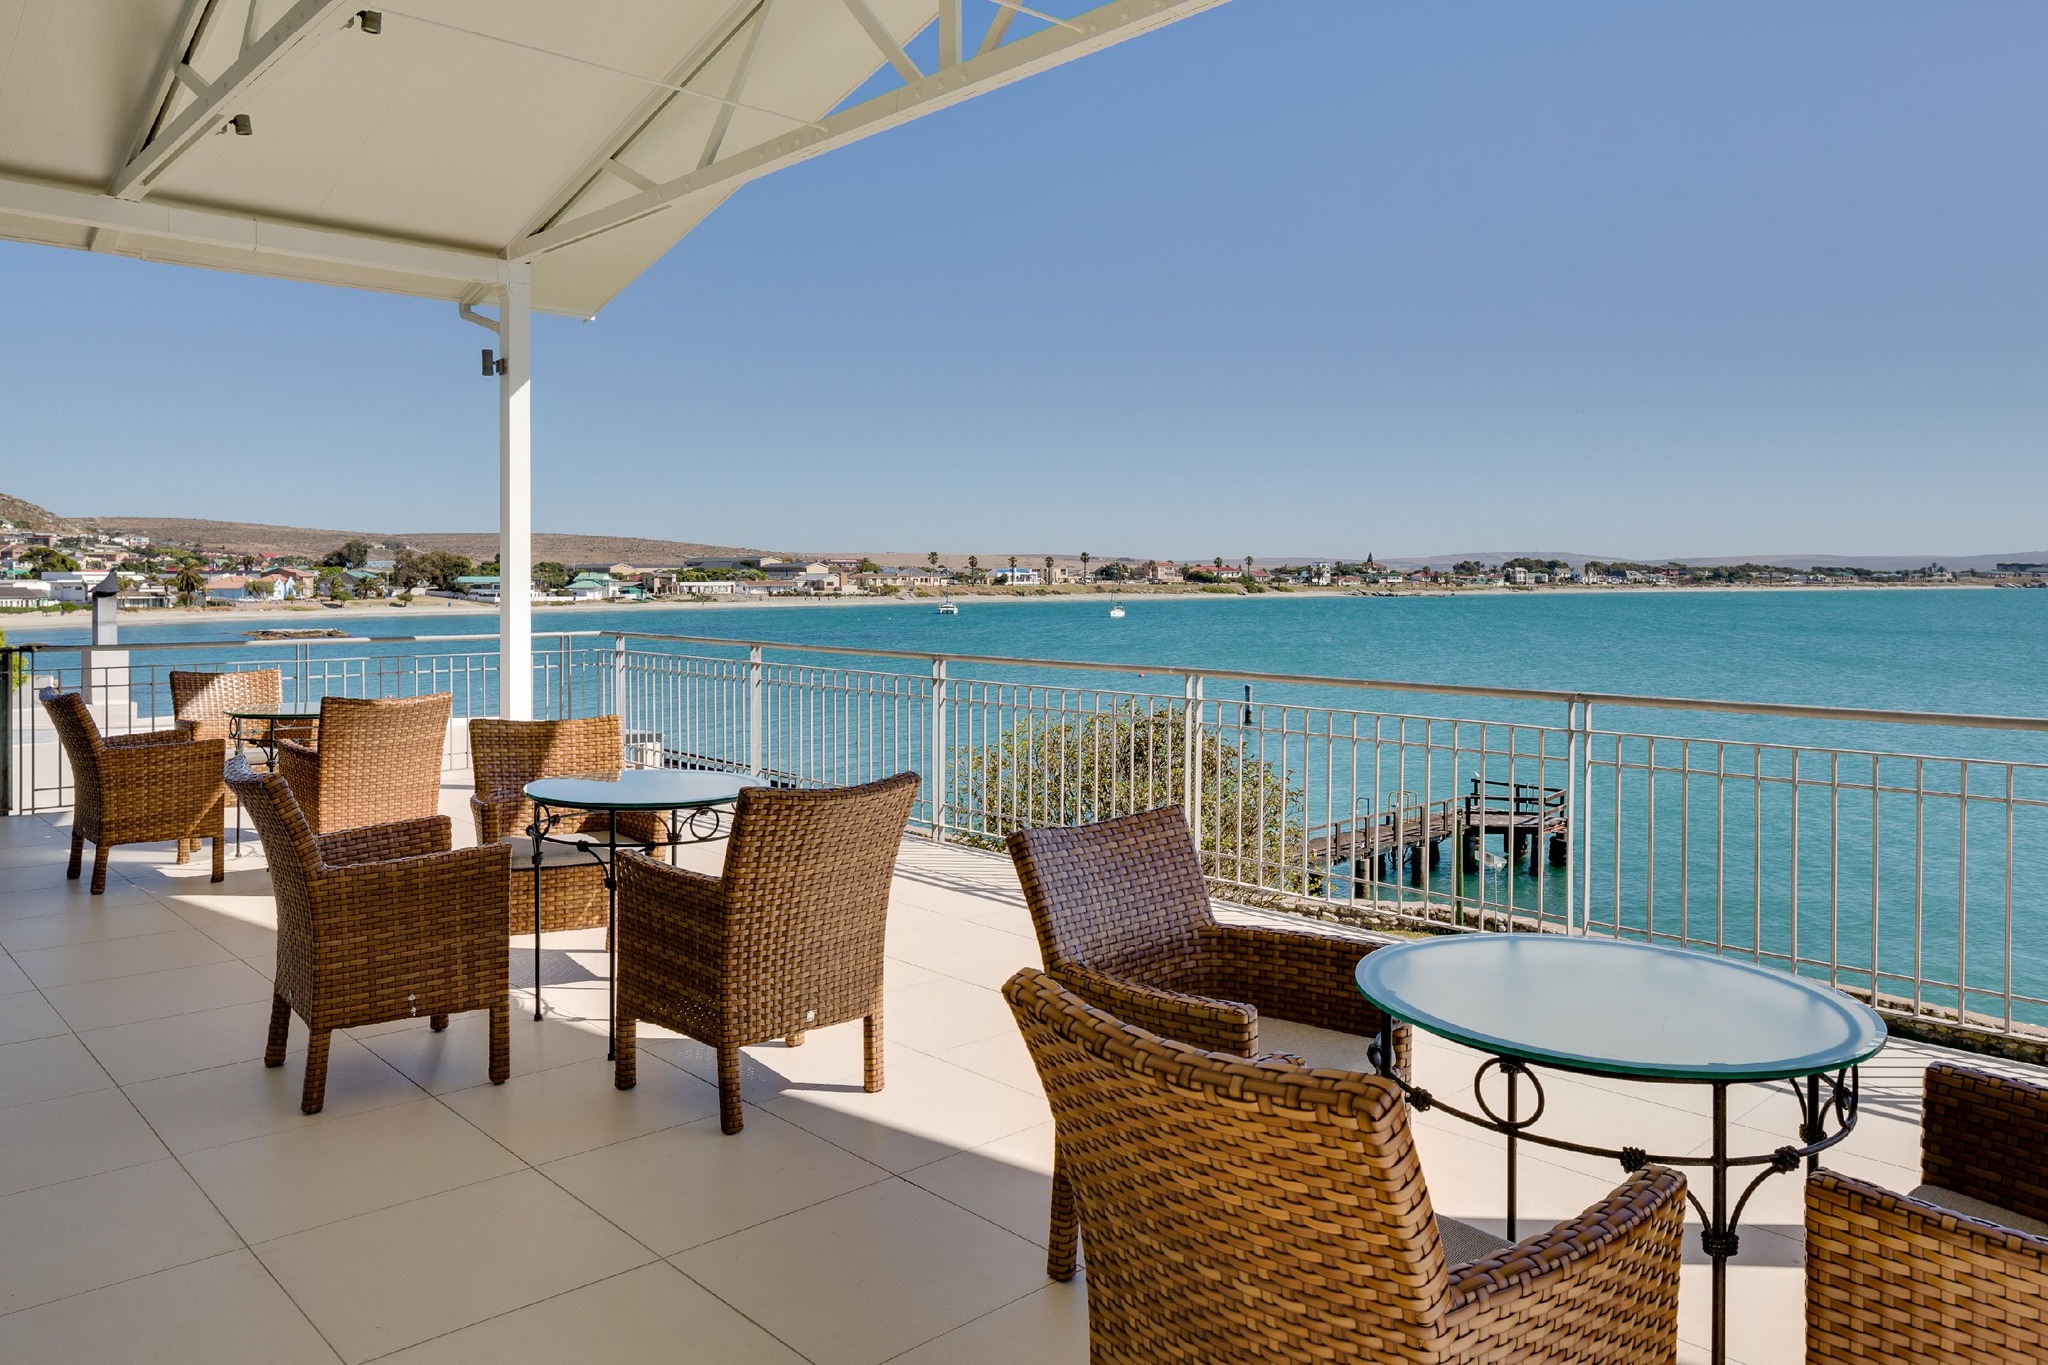 Saldanha Bay Hotel's annual Seafood Festival is coming up